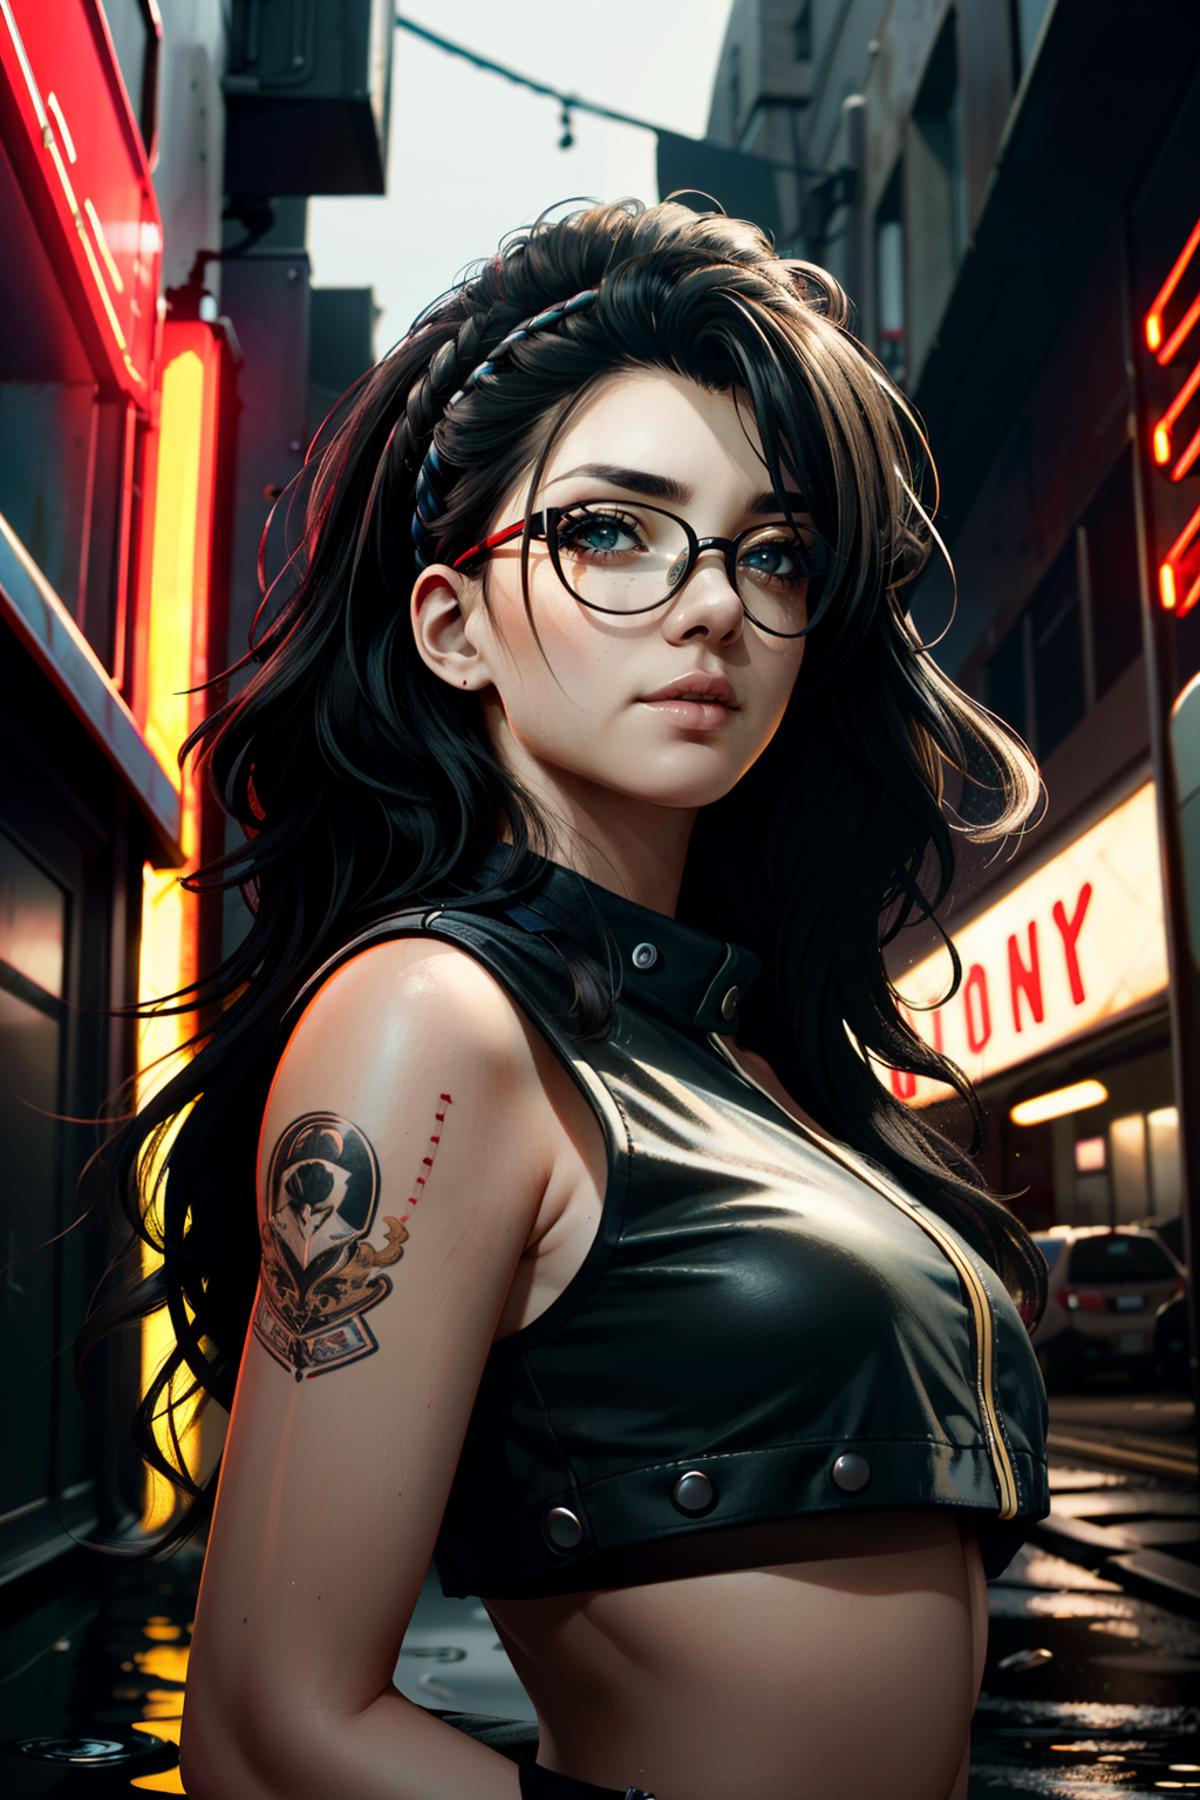 Nico from Devil May Cry 5 image by BloodRedKittie